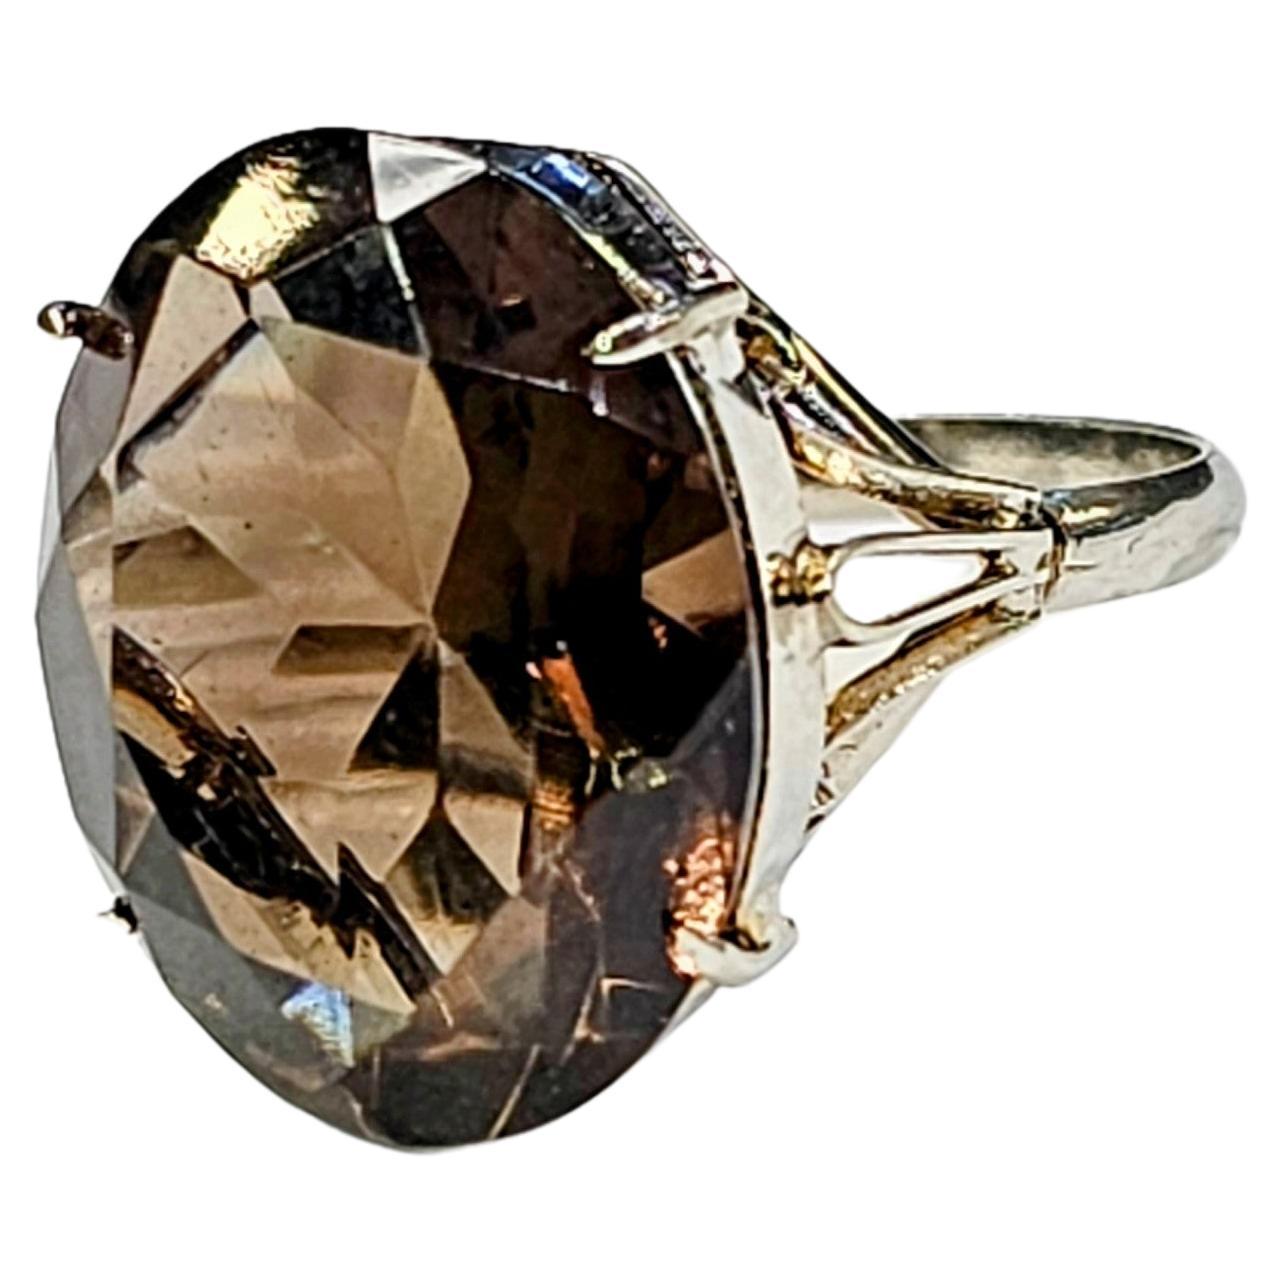 Smoky Quartz Ring

A 10 karat white gold ring set with a large oval smoky quarts

Gross Weight: 5.4 grams

Ring Size: 8

Resizable free of charge